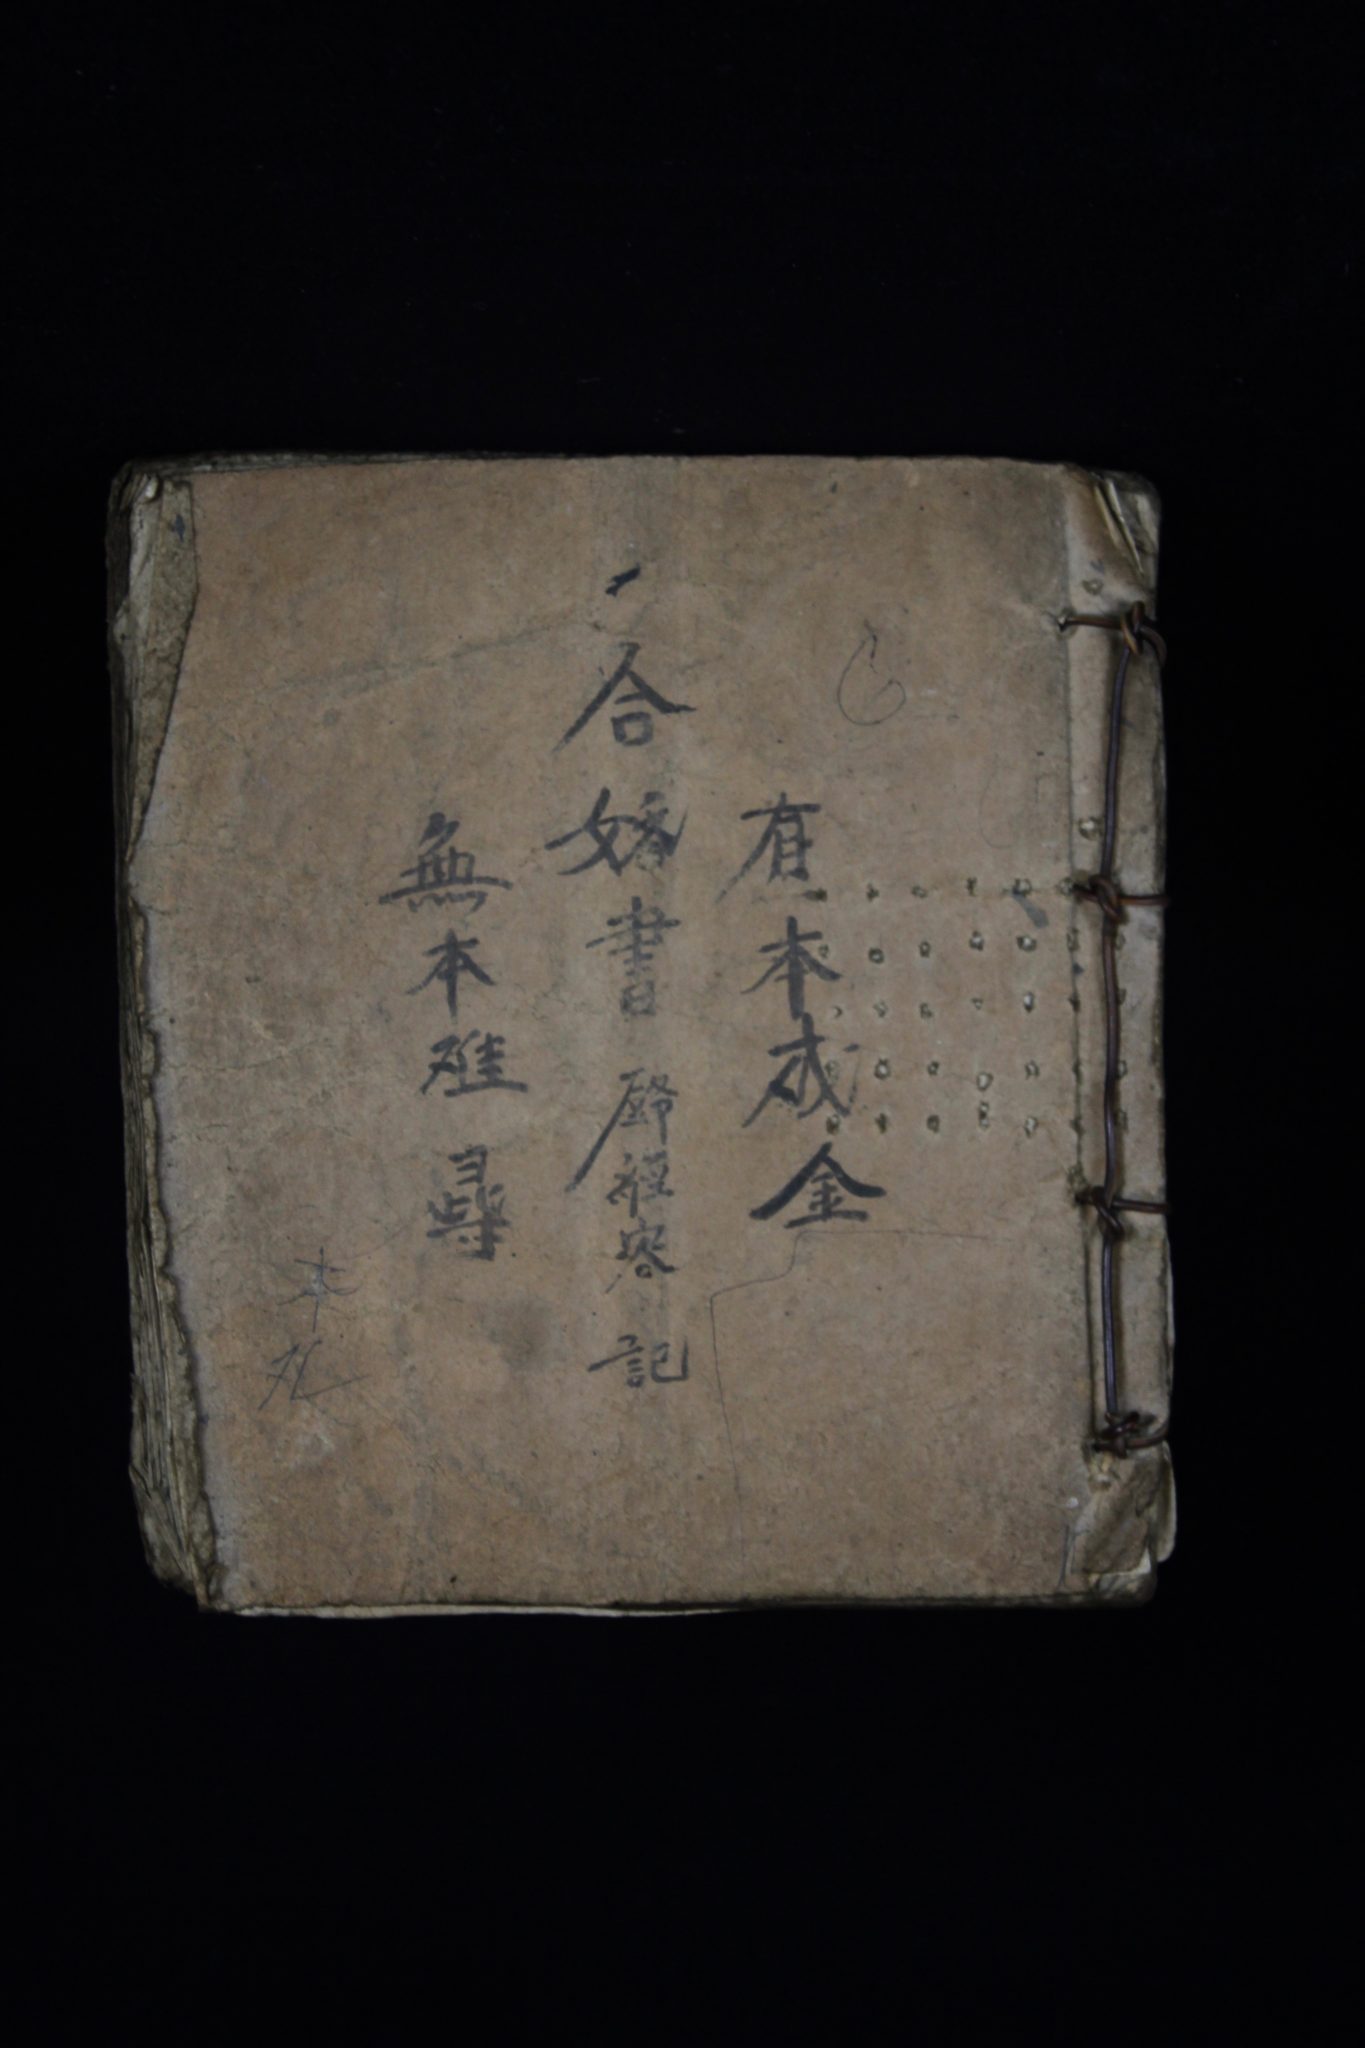 Shaman’s Personal Instruction Book, Cao Bang province, Vietnam, Early 20th c, Ink on handmade mulberry paper (tapa), Written in Nom (Chinese characters adapted to Vietnamese), books are an integral part of a shaman’s repertoire. They range from explanations of various rituals and use of objects, to astrology, history, songs, laws, etiquette, children’s tales, hunting practices, formulas, spells and Feng Shui. Shaman make their own books to help store their knowledge therefore no two are alike and a high level shaman will have a large library. 9 ½” x 8 ½” x ¾”, $850.